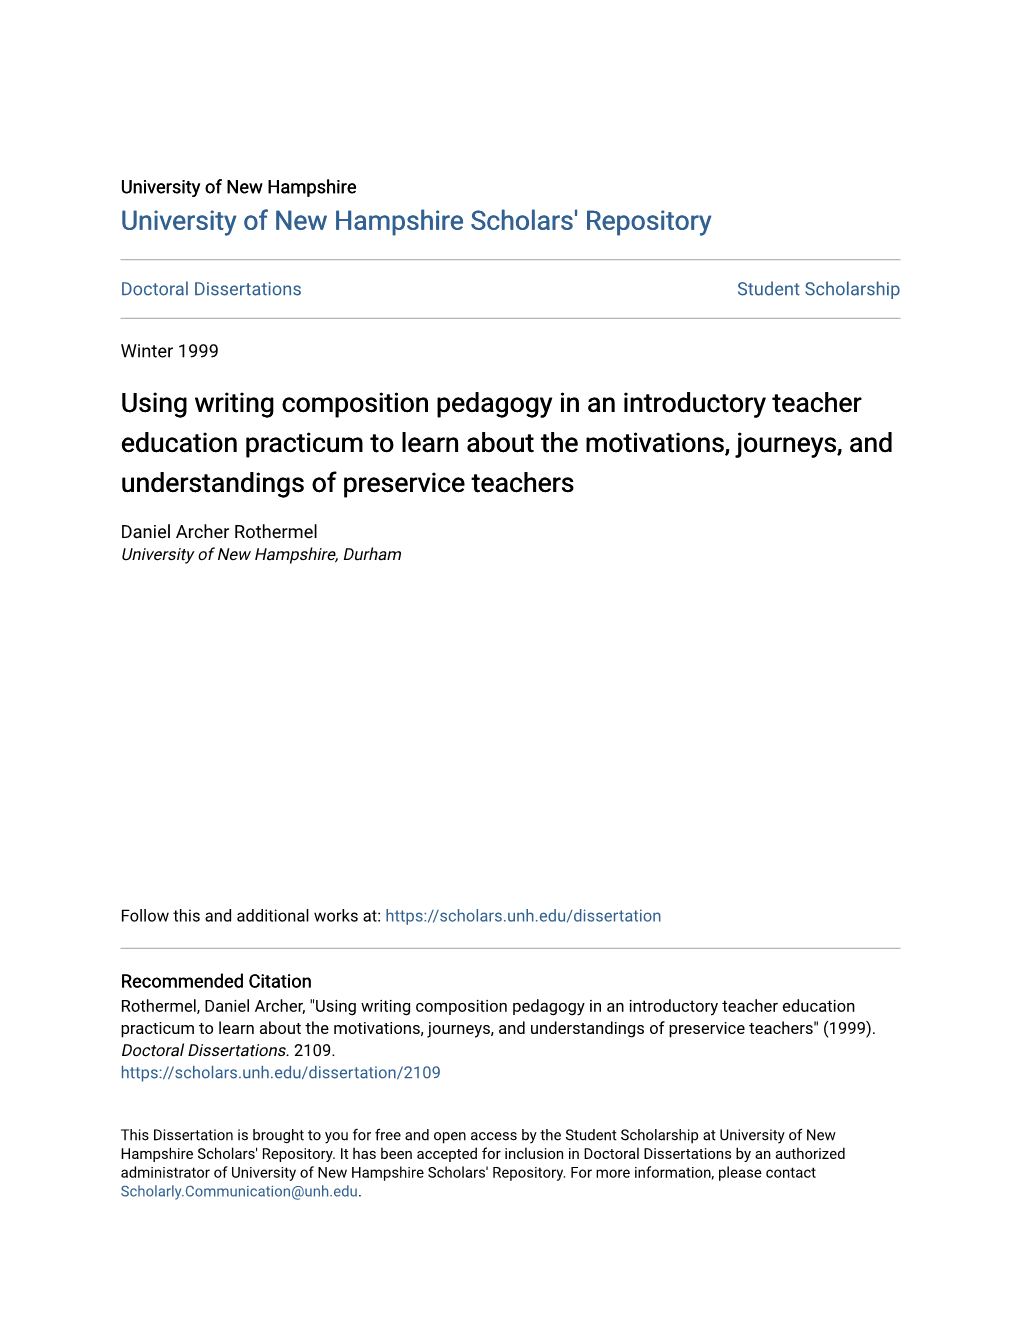 Using Writing Composition Pedagogy in an Introductory Teacher Education Practicum to Learn About the Motivations, Journeys, and Understandings of Preservice Teachers